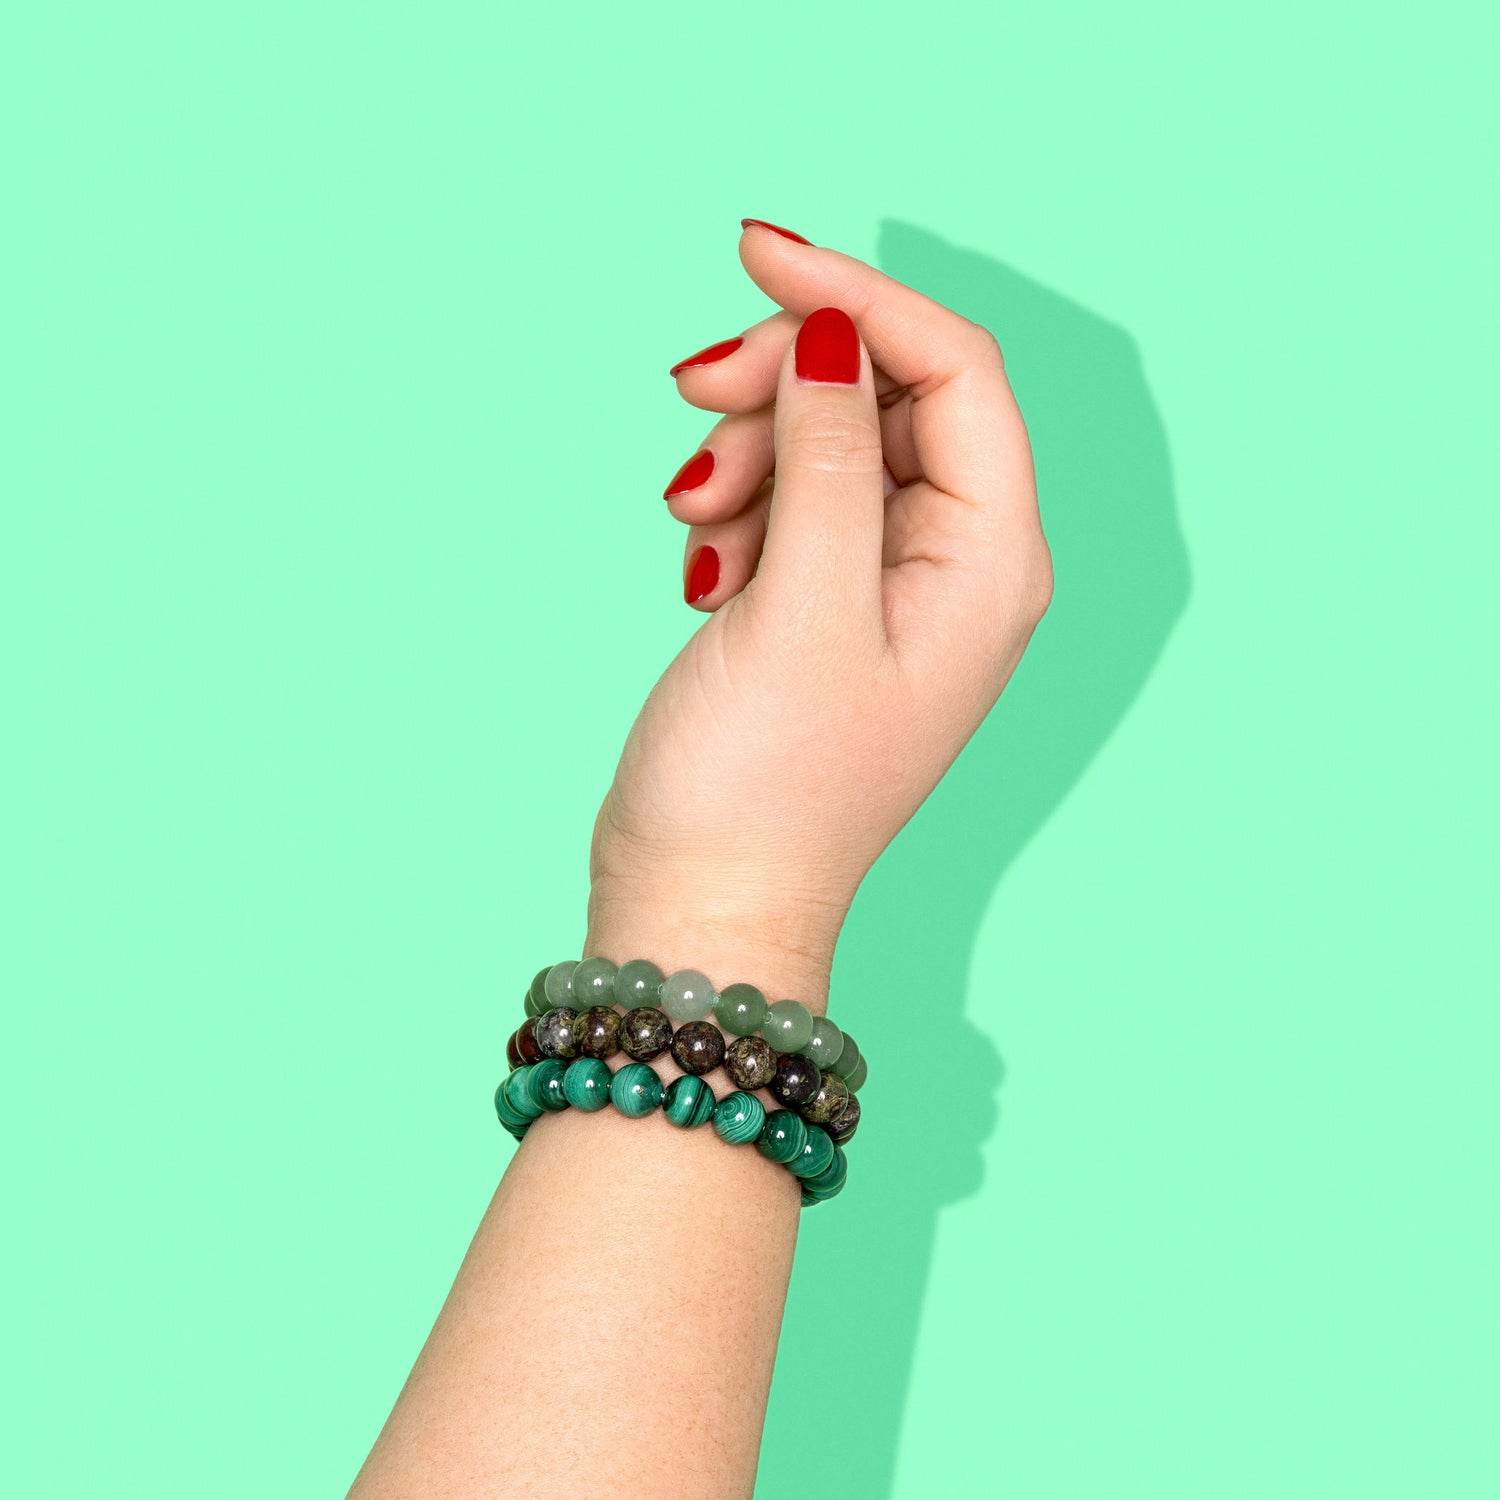 A hand with bright red nails wearing 3 different green coloured crystal gemstone bracelets. The background is bright green with a hard shadow to the right.